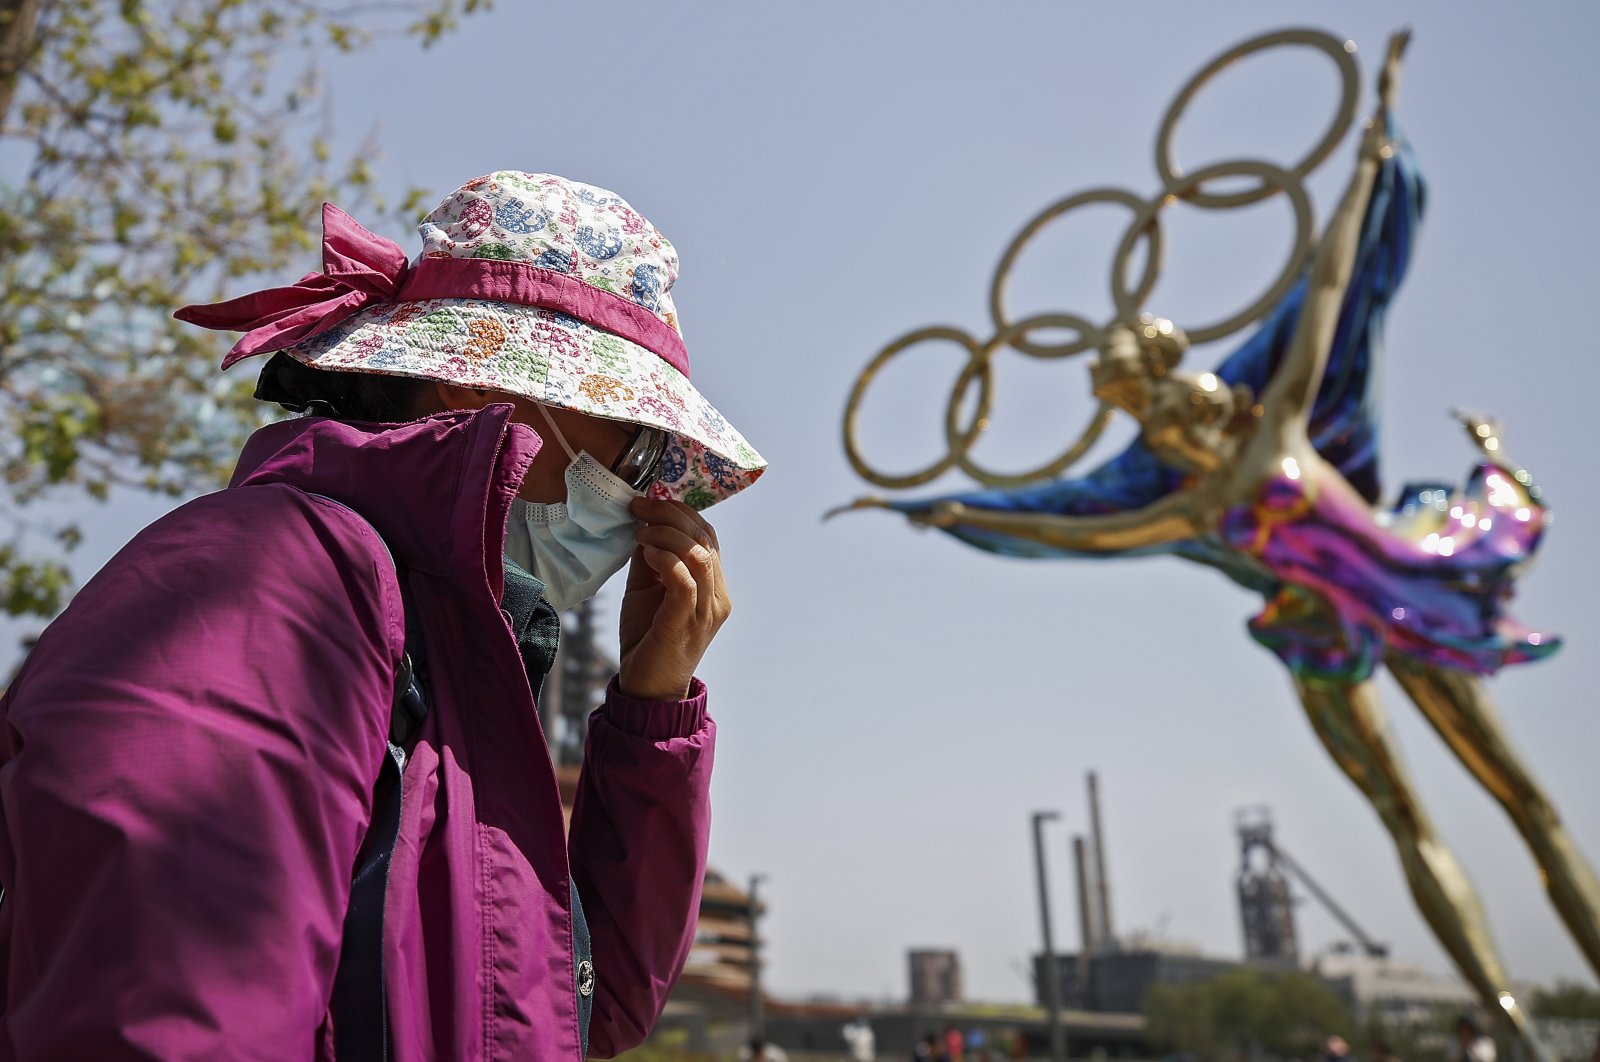 A woman adjusts her face mask as she walks by a statue featuring the Beijing Winter Olympics figure skating at the Shougang Park in Beijing, China, May 2, 2021. (AP Photo)